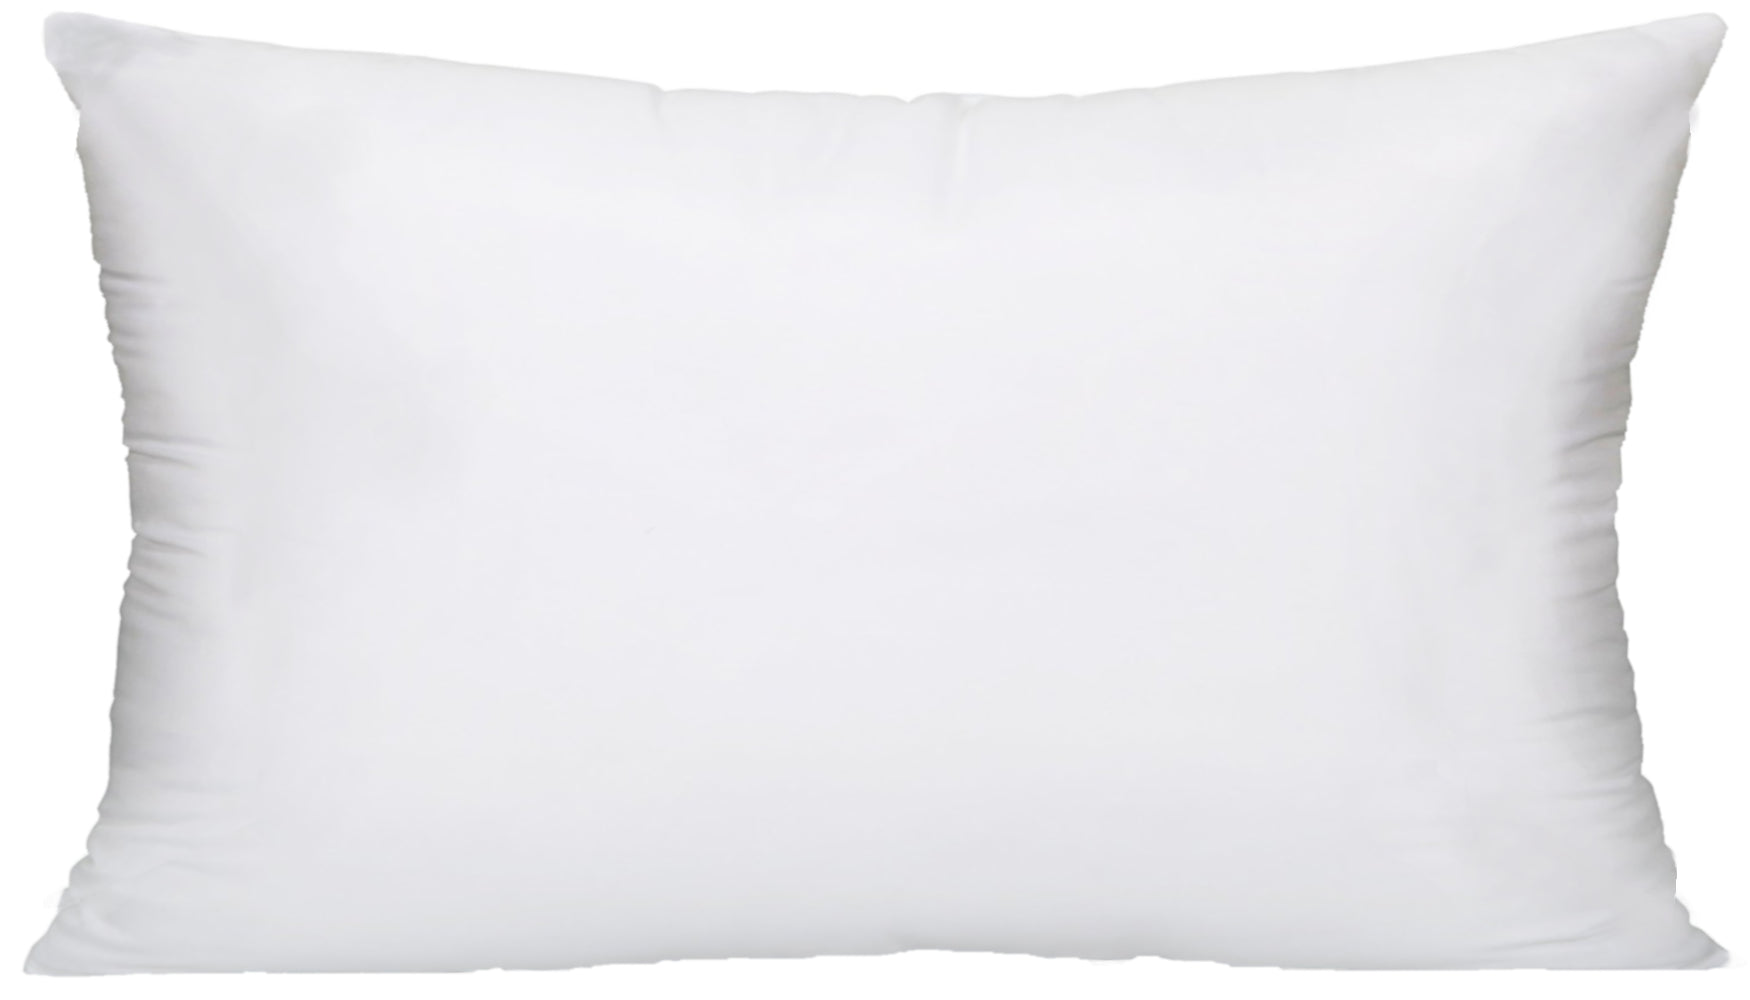  A synthetic down pillow is a type of pillow designed to mimic the feel of traditional down pillows while offering hypoallergenic benefits and often being more affordable. Unlike natural down, which is made from the soft undercoating of ducks or geese, synthetic down is made from polyester fibers that are engineered to closely resemble the loftiness and resilience of natural down.